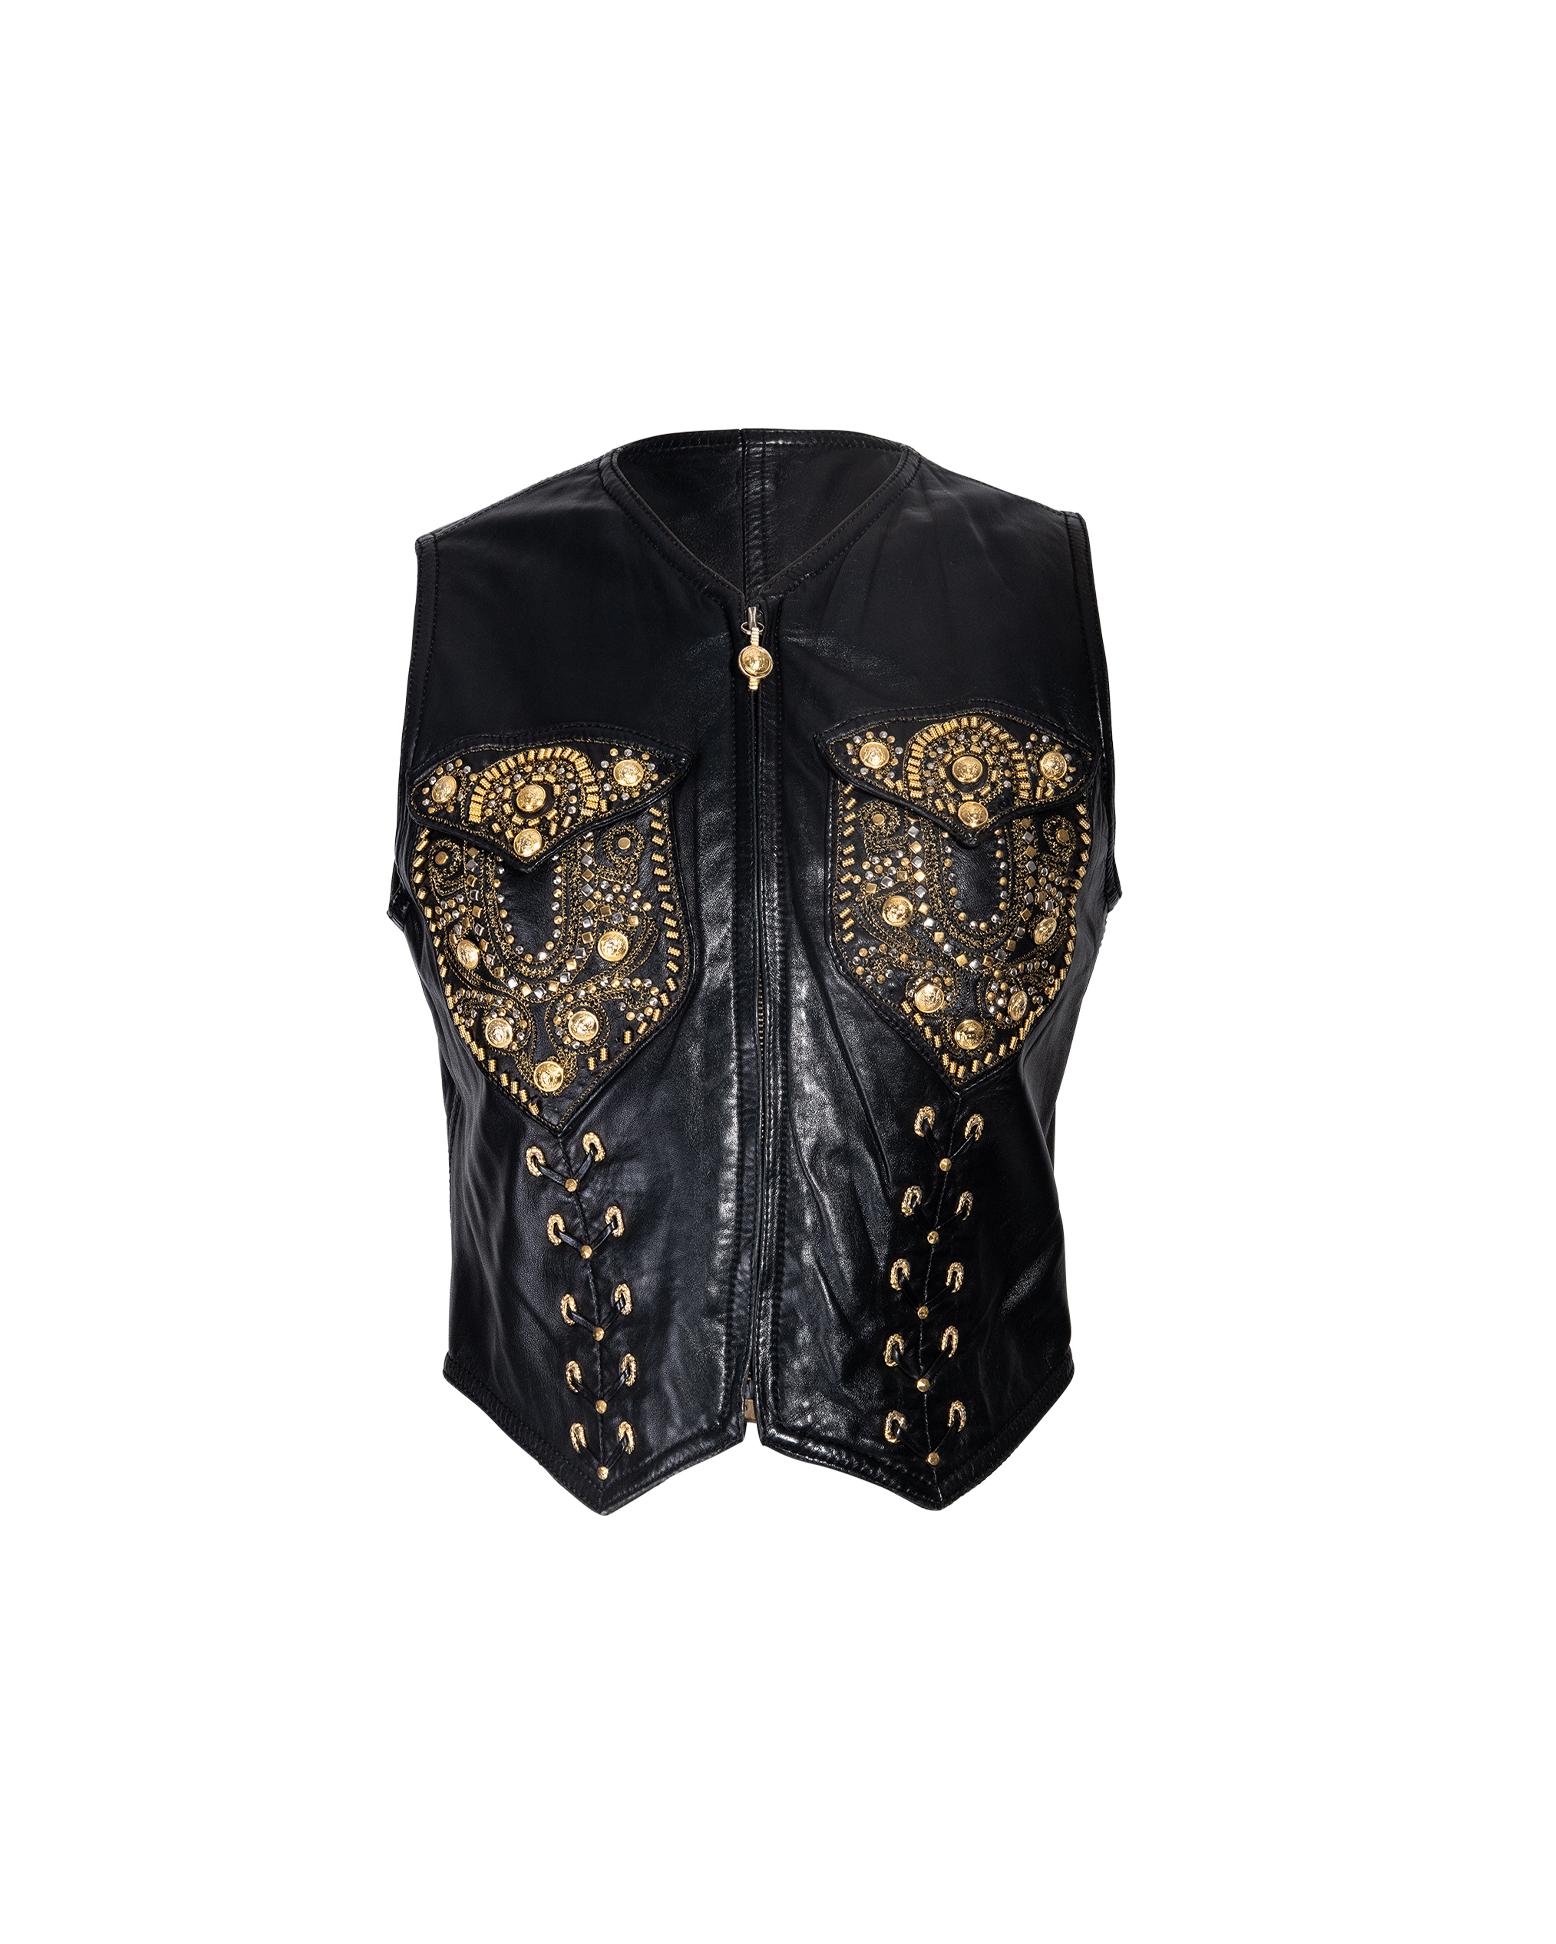 A/W 1992 Gianni Versace Leather Vest, Pant and Belt Set with Gold Stud Details 8